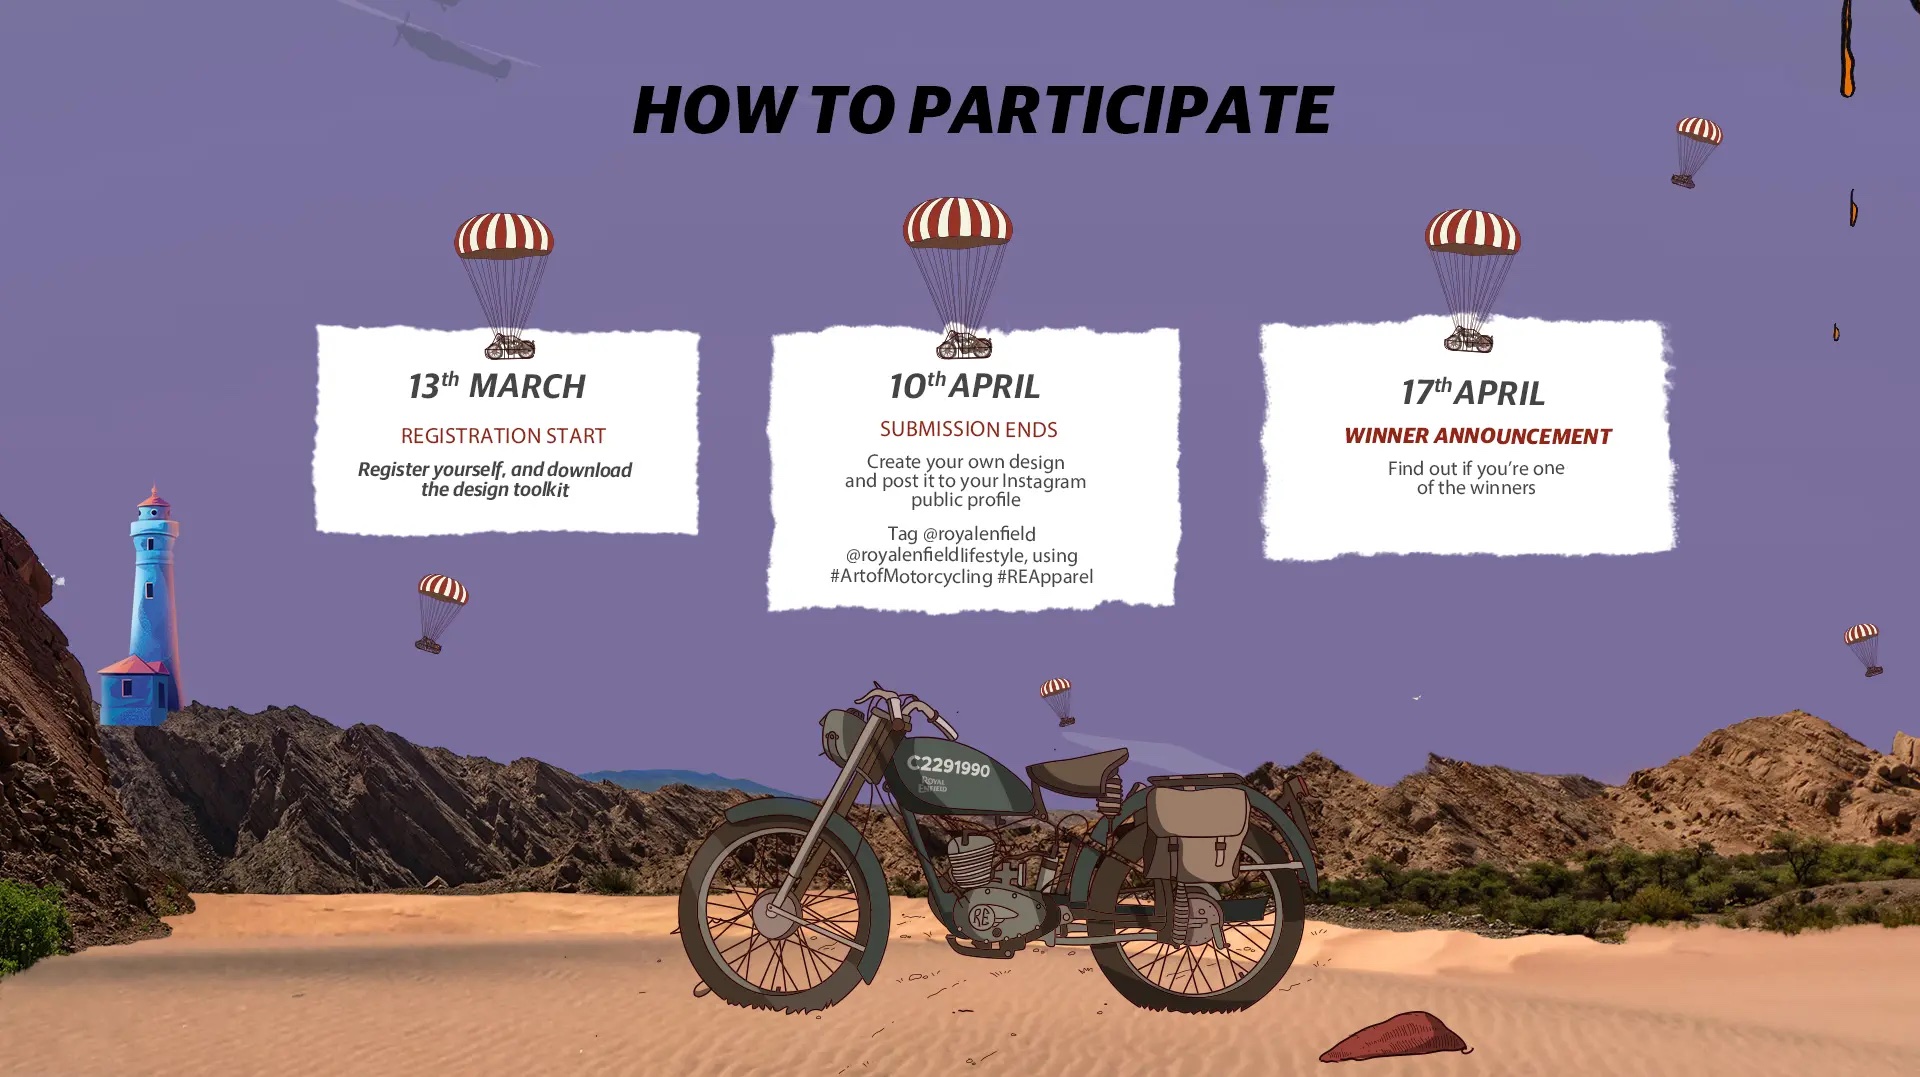 A view of Royal Enfield's Art of Motorcycling campaign. Media sourced from Royal Enfield's website.